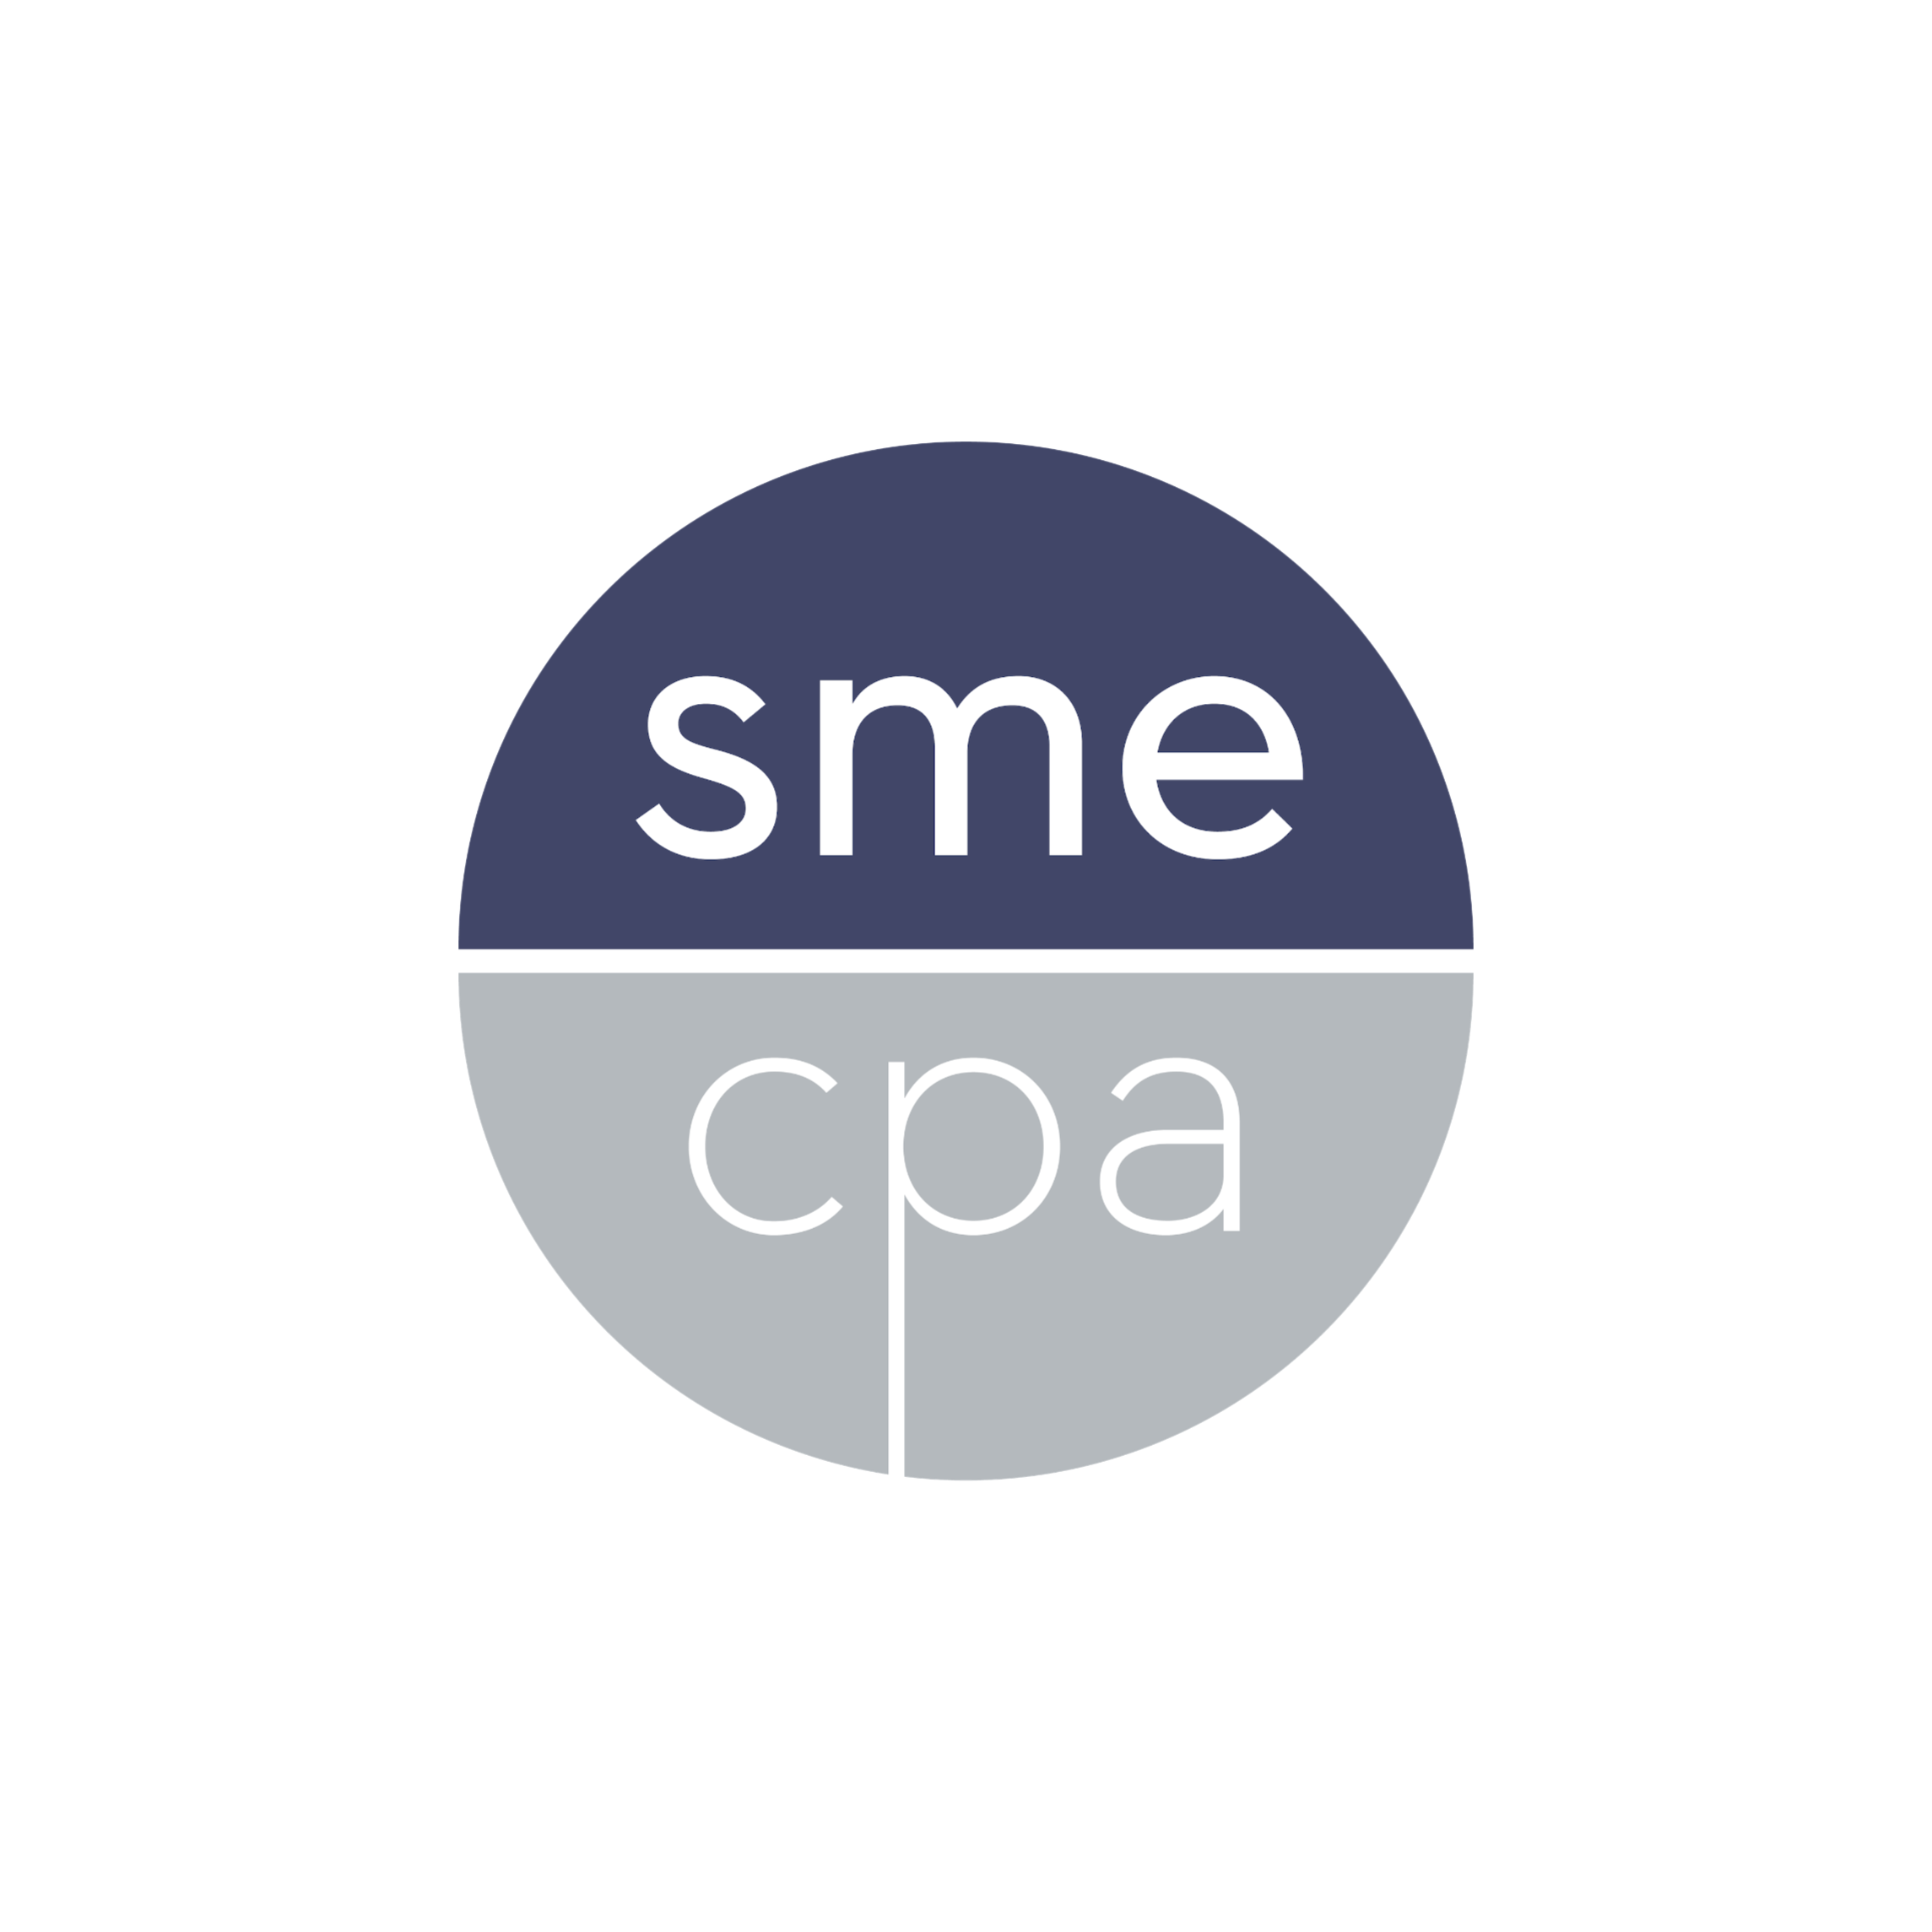 SME CPA supports theClubhou.se